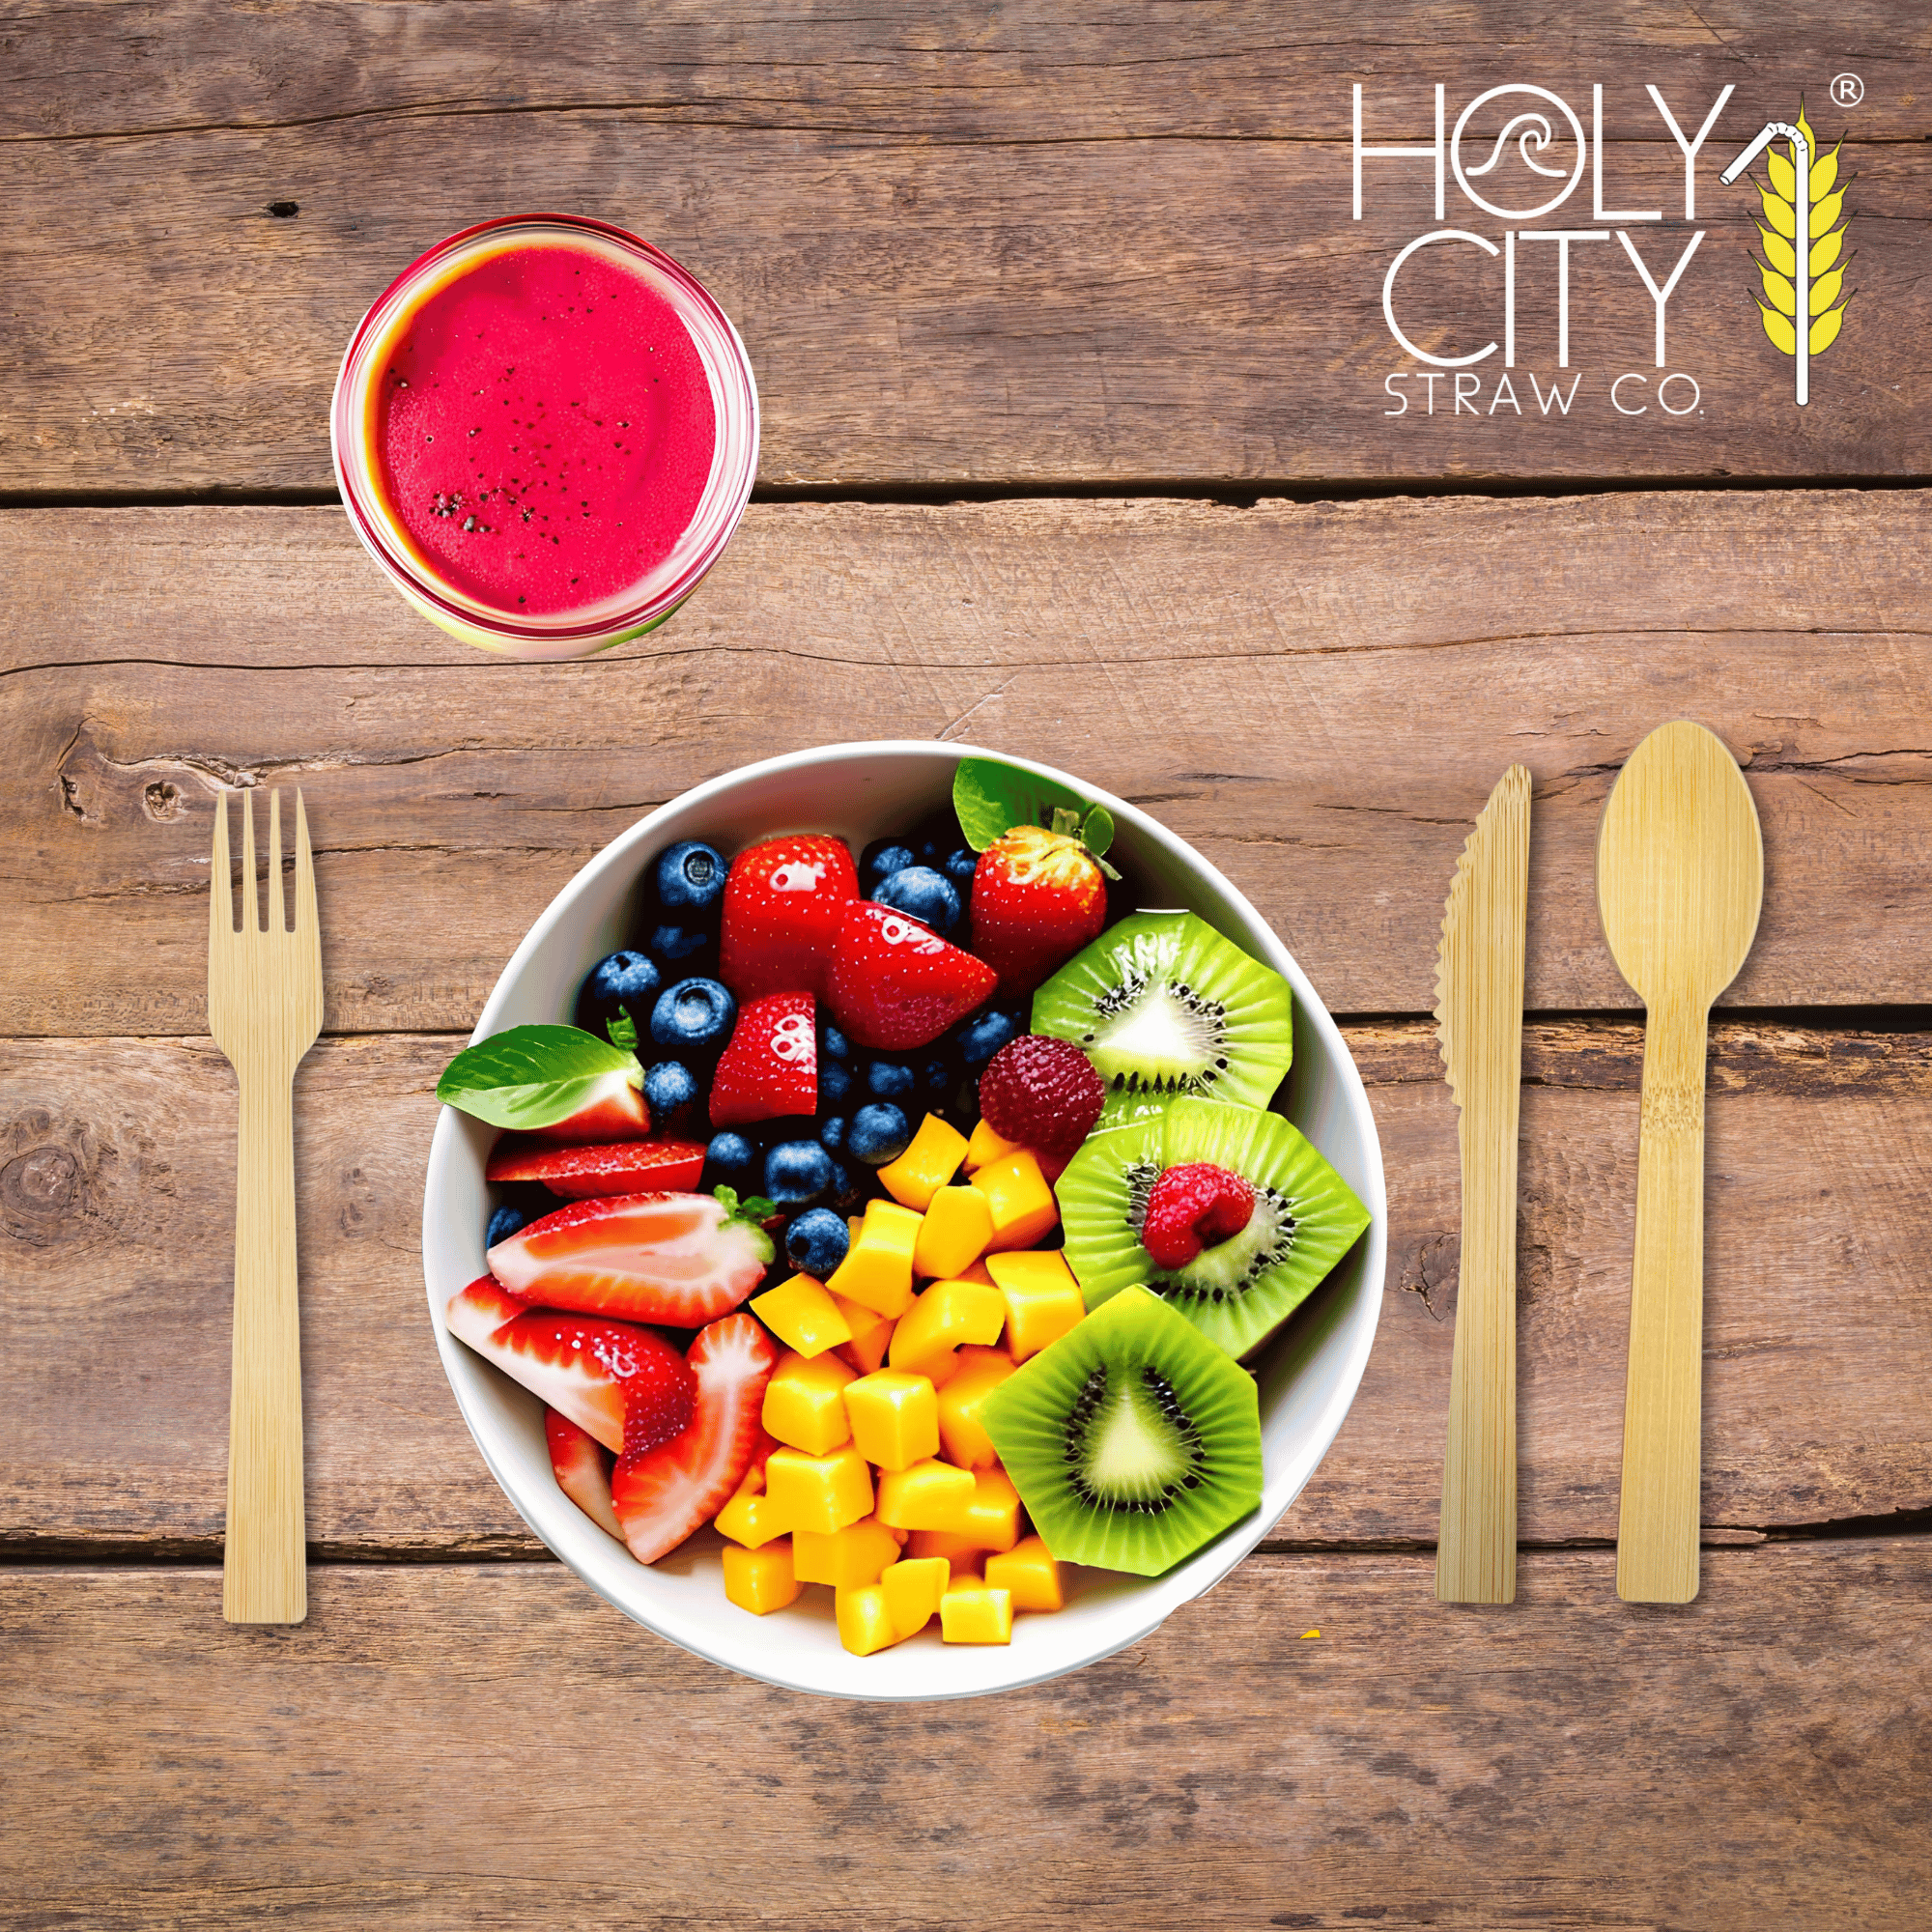 Top view of a wooden table setting featuring Holy City Straw Co. brand bamboo cutlery, with a bamboo fork on the left and a knife on the right, framing a colorful bowl of fresh fruit salad containing strawberries, blueberries, kiwi, and mango cubes. Above the bowl is a glass of red smoothie, and the Holy City Straw Co. logo with a wheat stalk icon is prominently displayed at the top